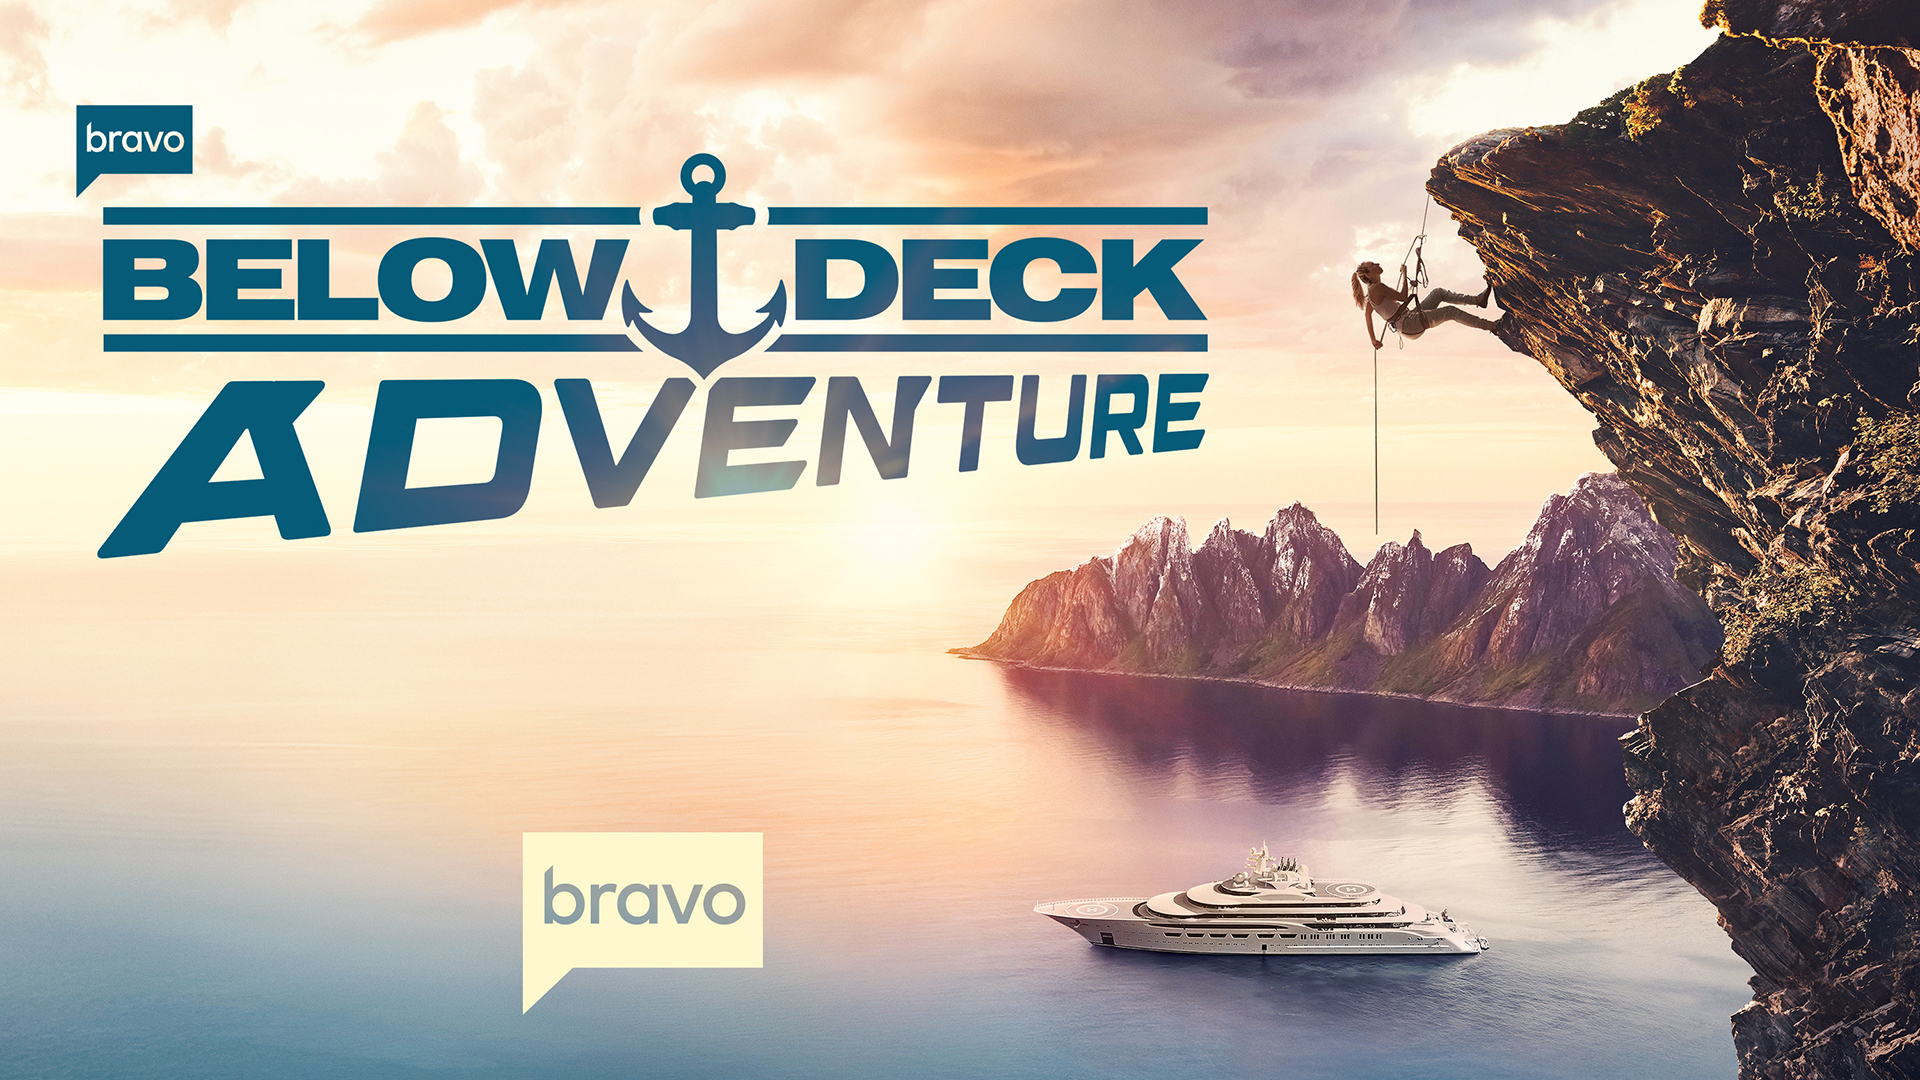 Below Deck Adventure - New Series November 1. Go to a video page.